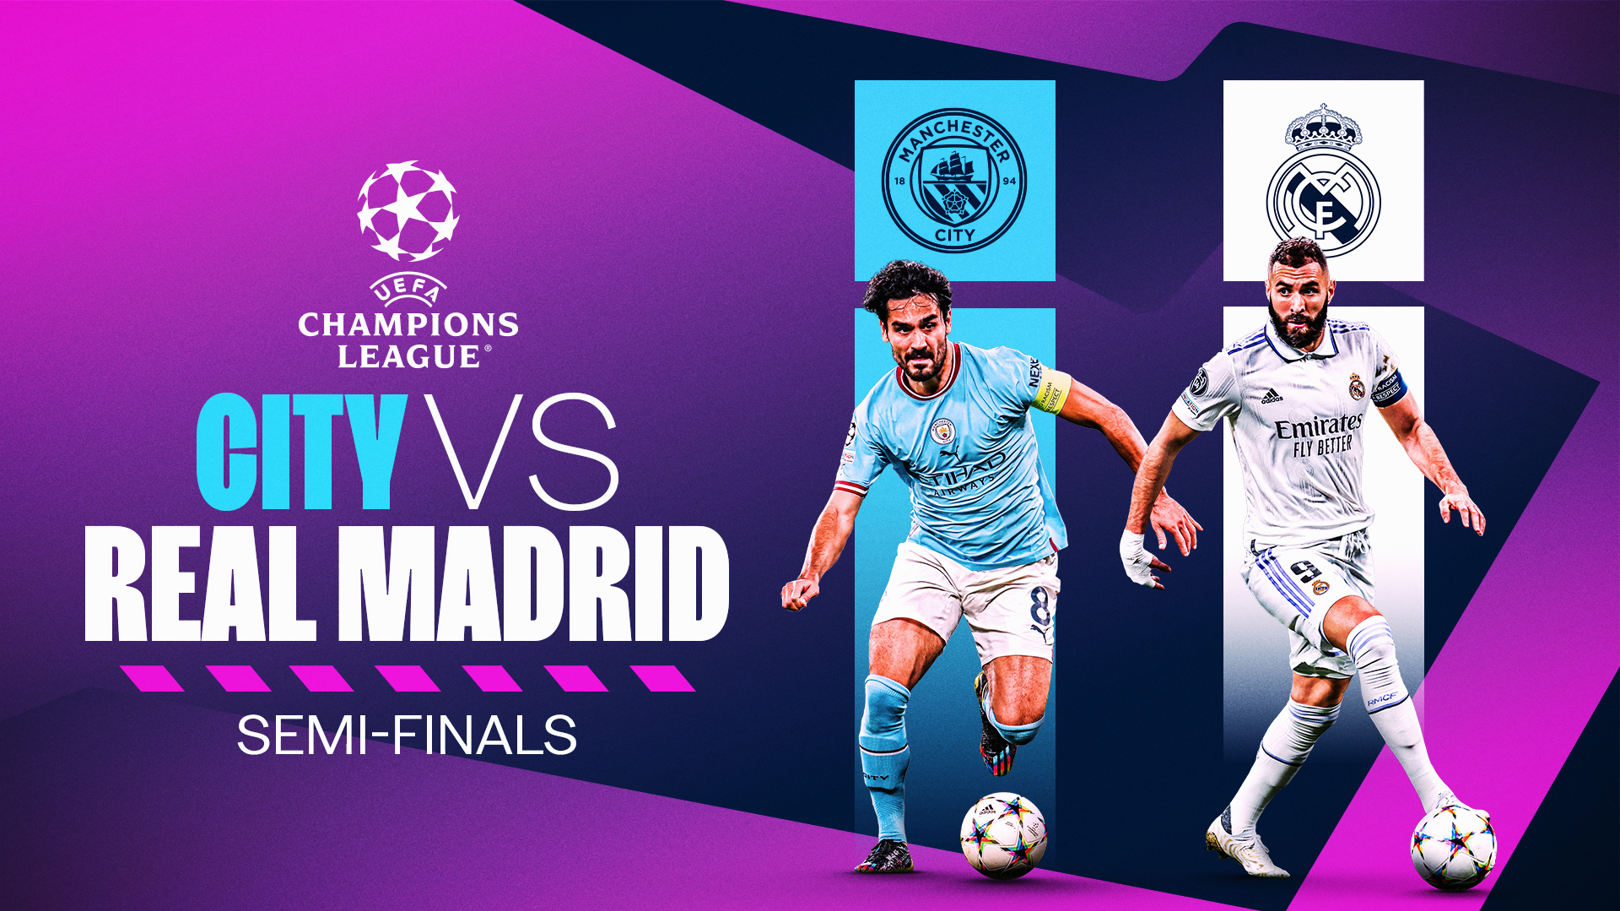 Dates confirmed for Champions League semifinal clash with Real Madrid